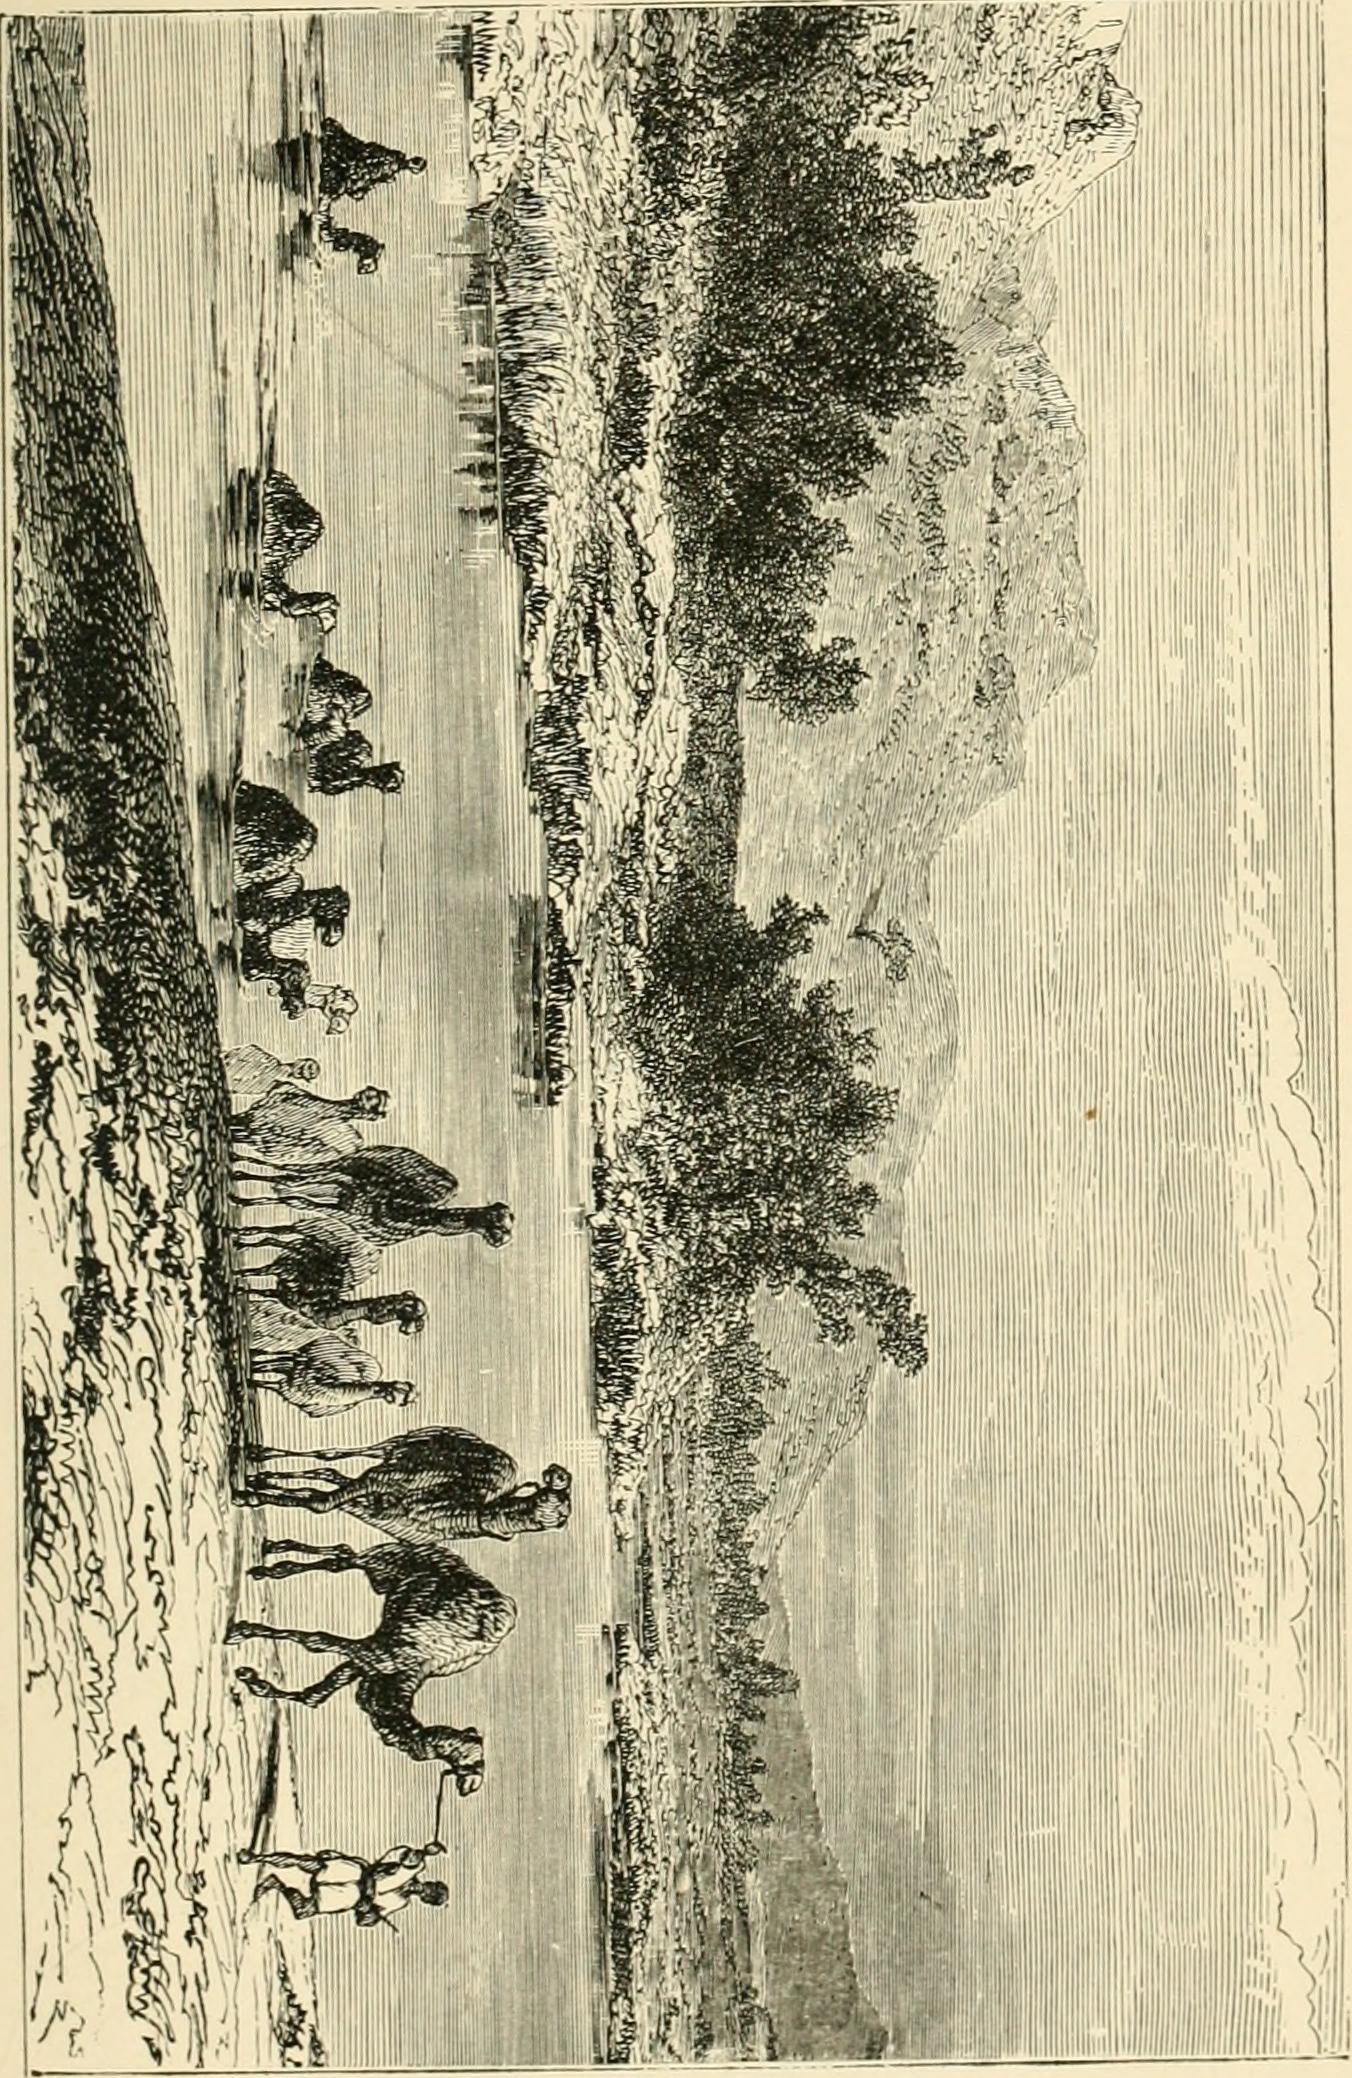 Image from page 42 of "The lake regions of central Africa. A record of modern discovery" (1881)